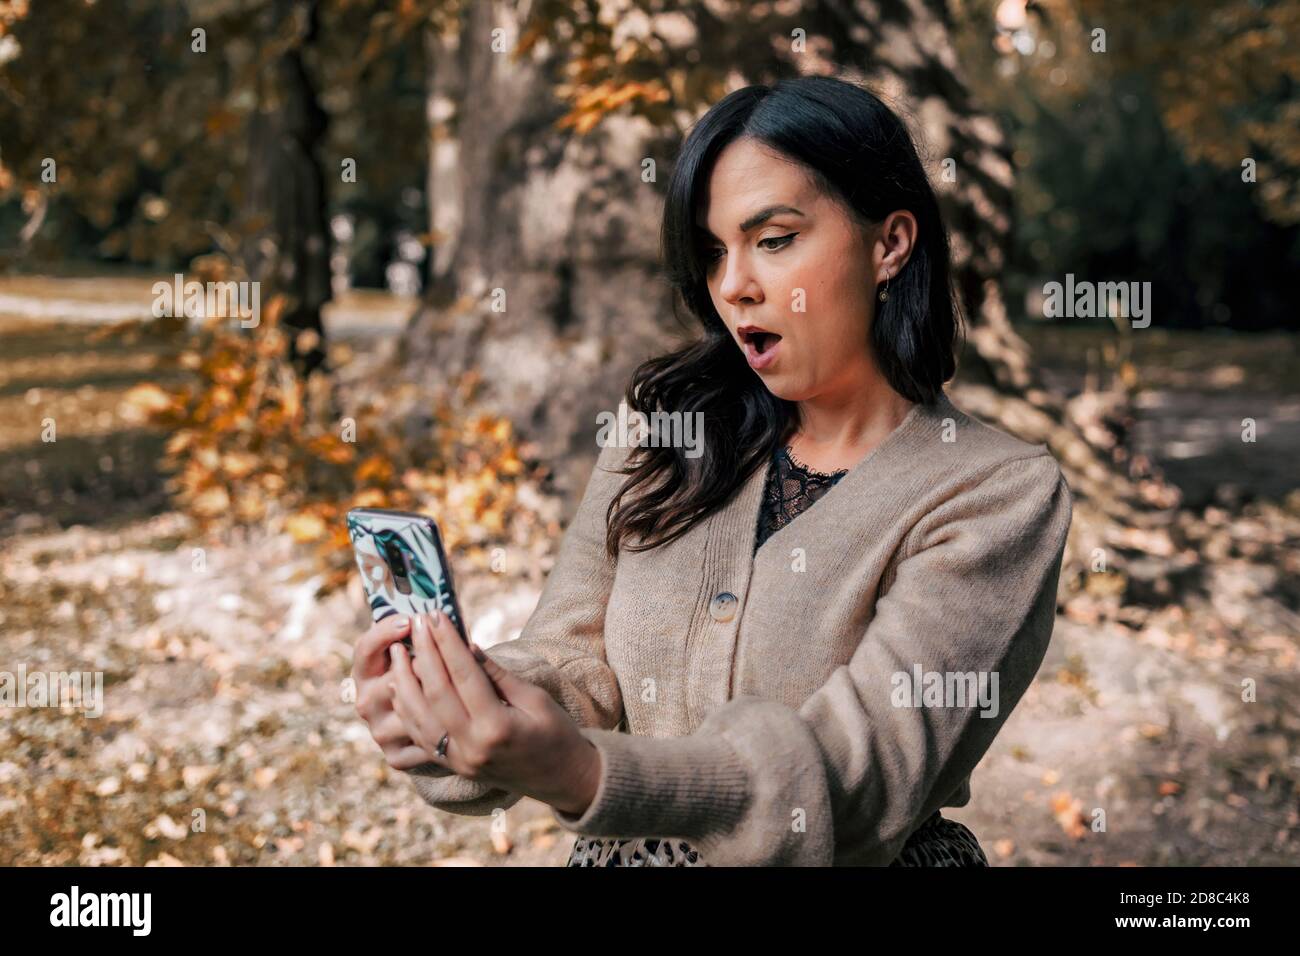 Female looking at her phone with a shocked face expression Stock Photo